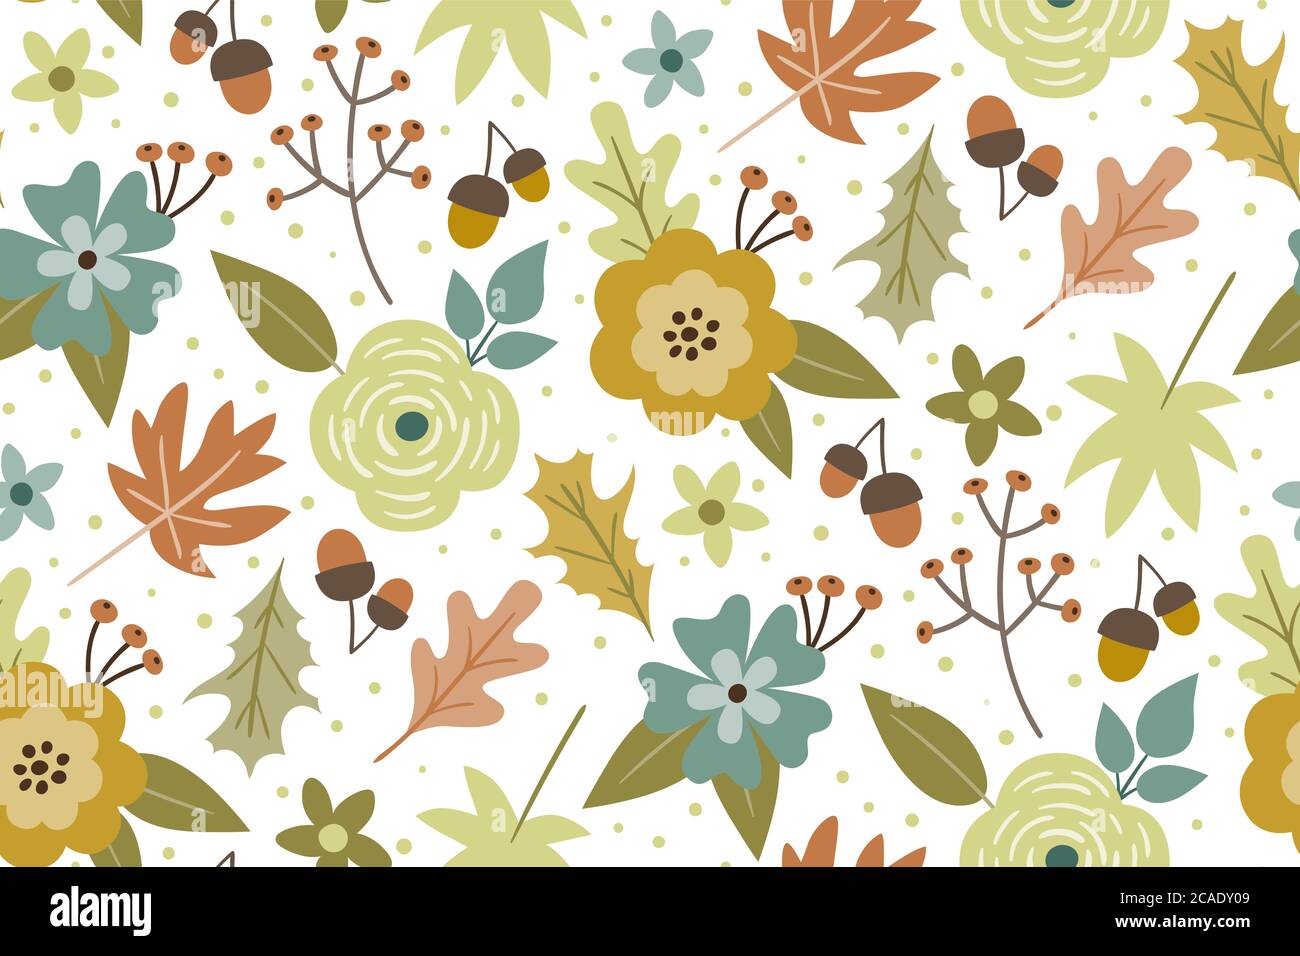 Autumn floral seamless pattern. Hand drawn colorful flowers, leaves and branches isolated on white background. Vector illustration. Stock Vector